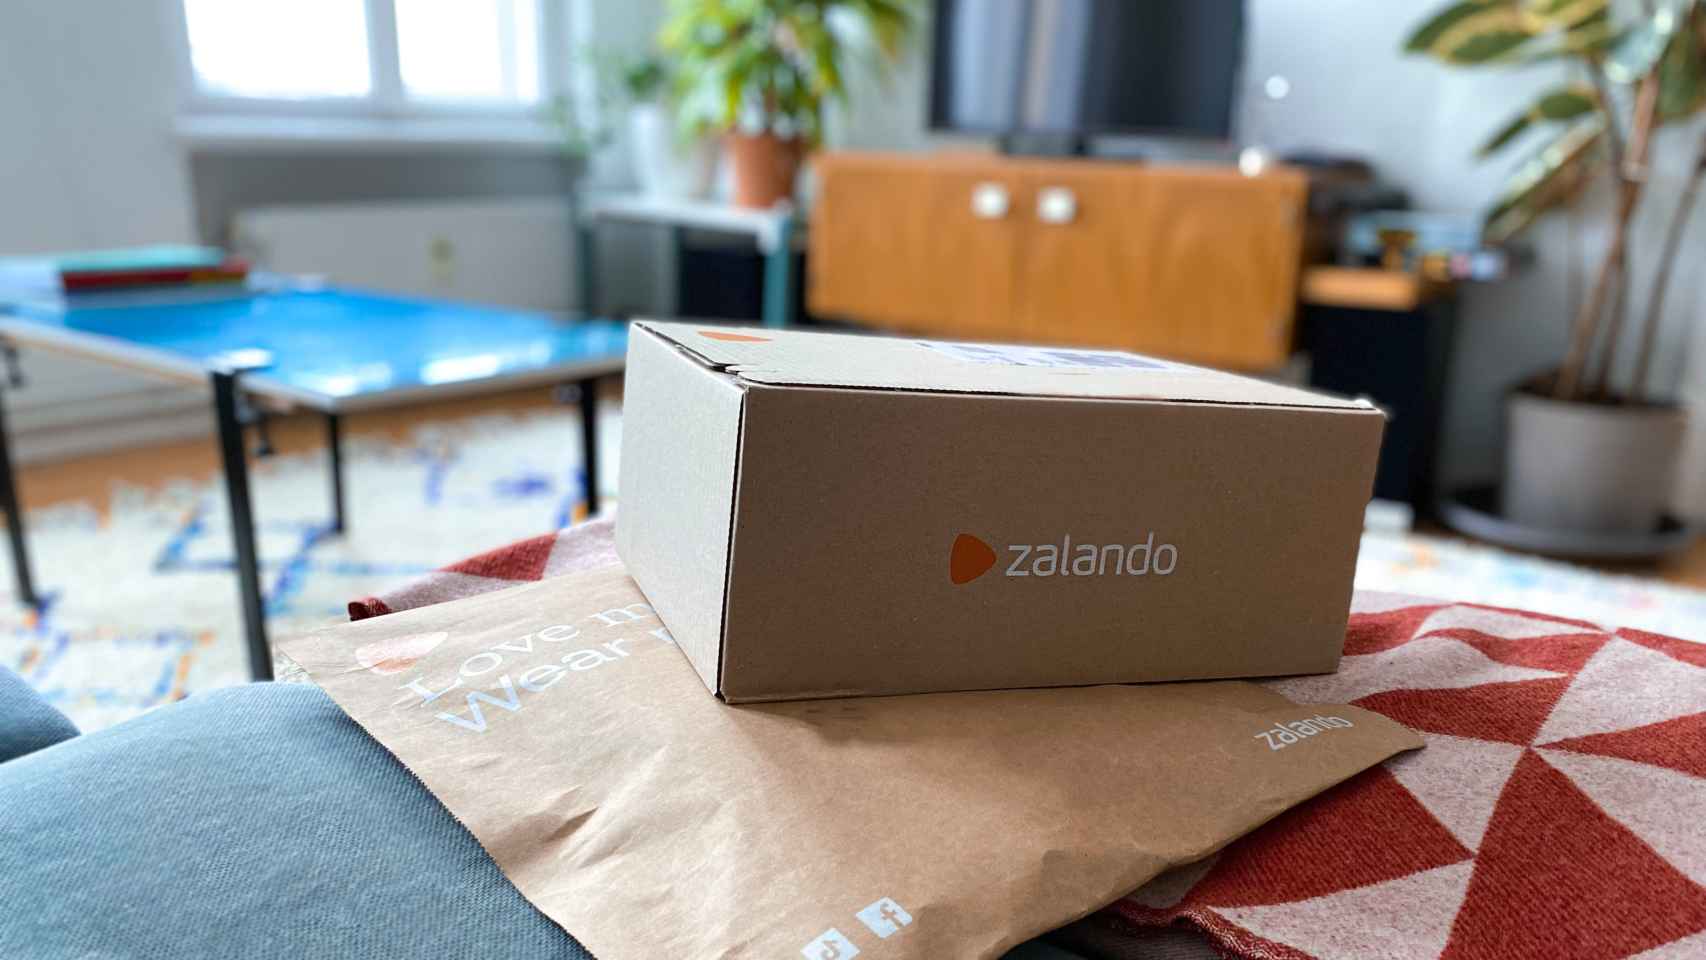 Zalando comes to Spain with tech and clothing revenue to ease size problems